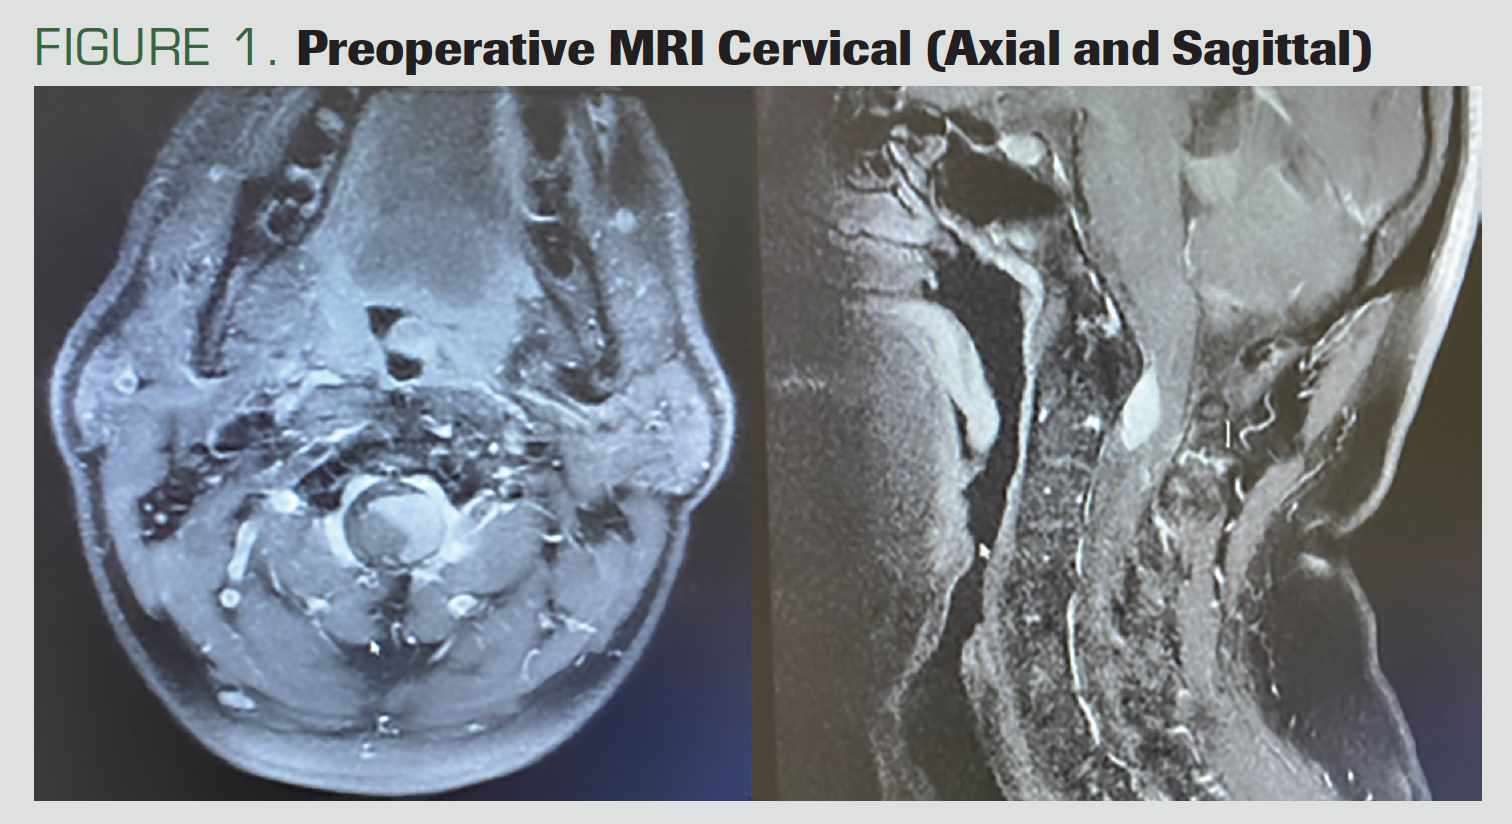 FIGURE 1. Preoperative MRI Cervical (Axial and Sagittal)